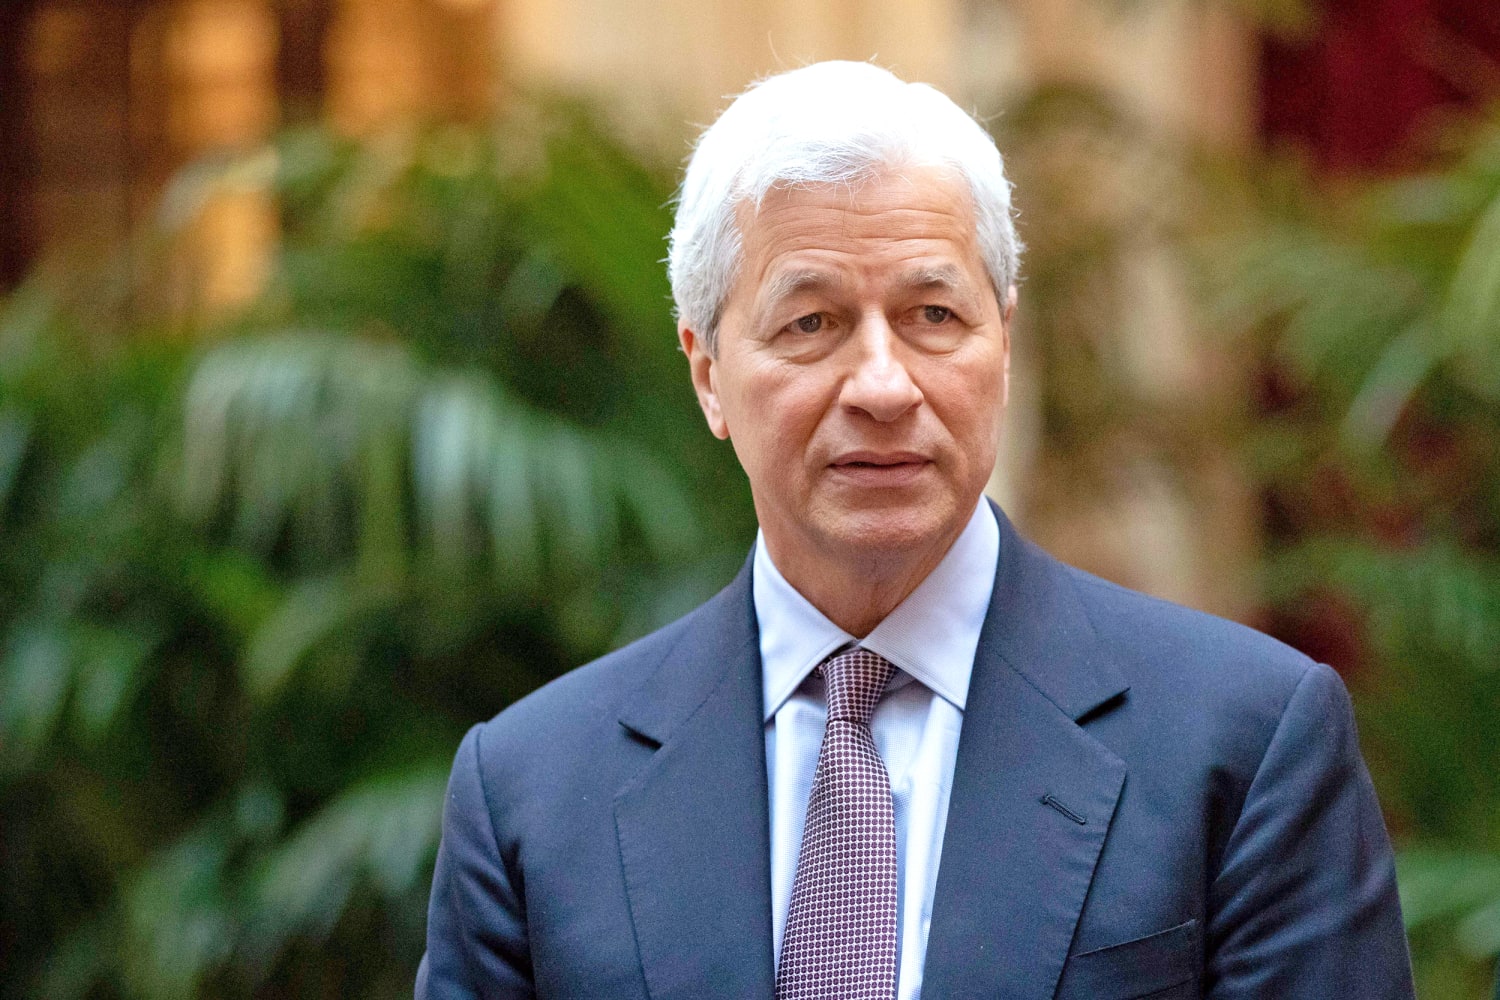 JPMorgan Chase CEO Jamie Dimon says economic boom could 'easily run into  2023'